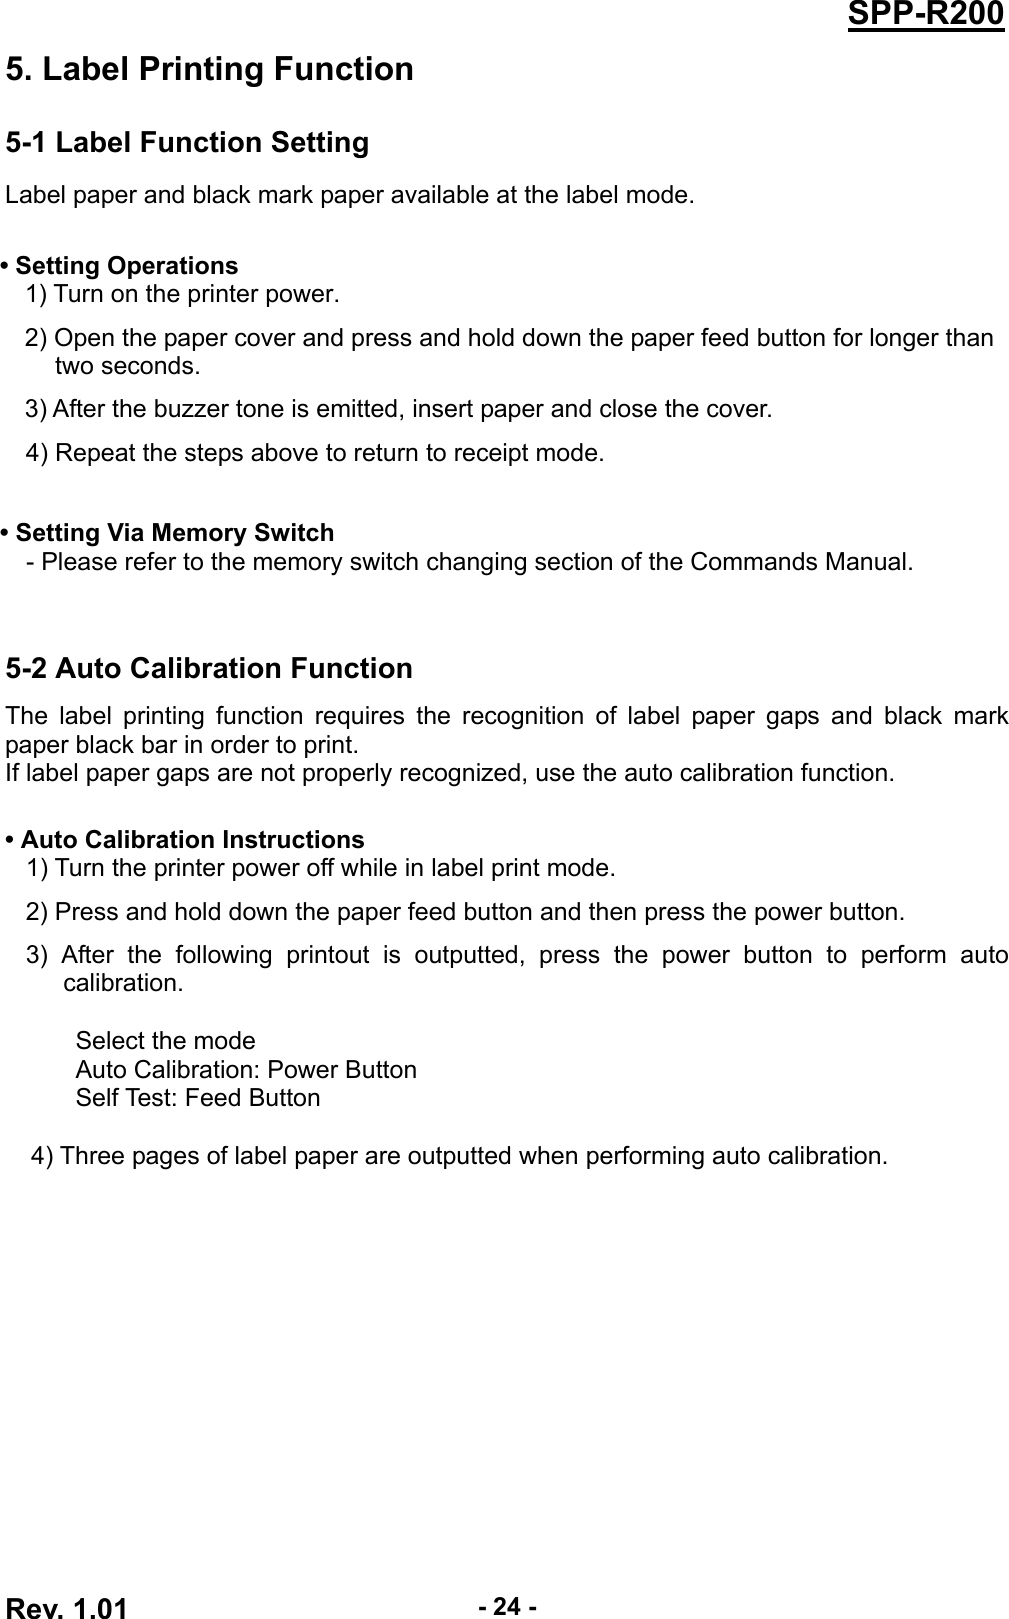  Rev. 1.01  - 24 -SPP-R2005. Label Printing Function 5-1 Label Function Setting Label paper and black mark paper available at the label mode.  • Setting Operations 1) Turn on the printer power. 2) Open the paper cover and press and hold down the paper feed button for longer than   two seconds. 3) After the buzzer tone is emitted, insert paper and close the cover. 4) Repeat the steps above to return to receipt mode.    • Setting Via Memory Switch - Please refer to the memory switch changing section of the Commands Manual.   5-2 Auto Calibration Function The label printing function requires the recognition of label paper gaps and black mark paper black bar in order to print. If label paper gaps are not properly recognized, use the auto calibration function.  • Auto Calibration Instructions 1) Turn the printer power off while in label print mode. 2) Press and hold down the paper feed button and then press the power button. 3) After the following printout is outputted, press the power button to perform auto calibration.  Select the mode Auto Calibration: Power Button Self Test: Feed Button   4) Three pages of label paper are outputted when performing auto calibration.  